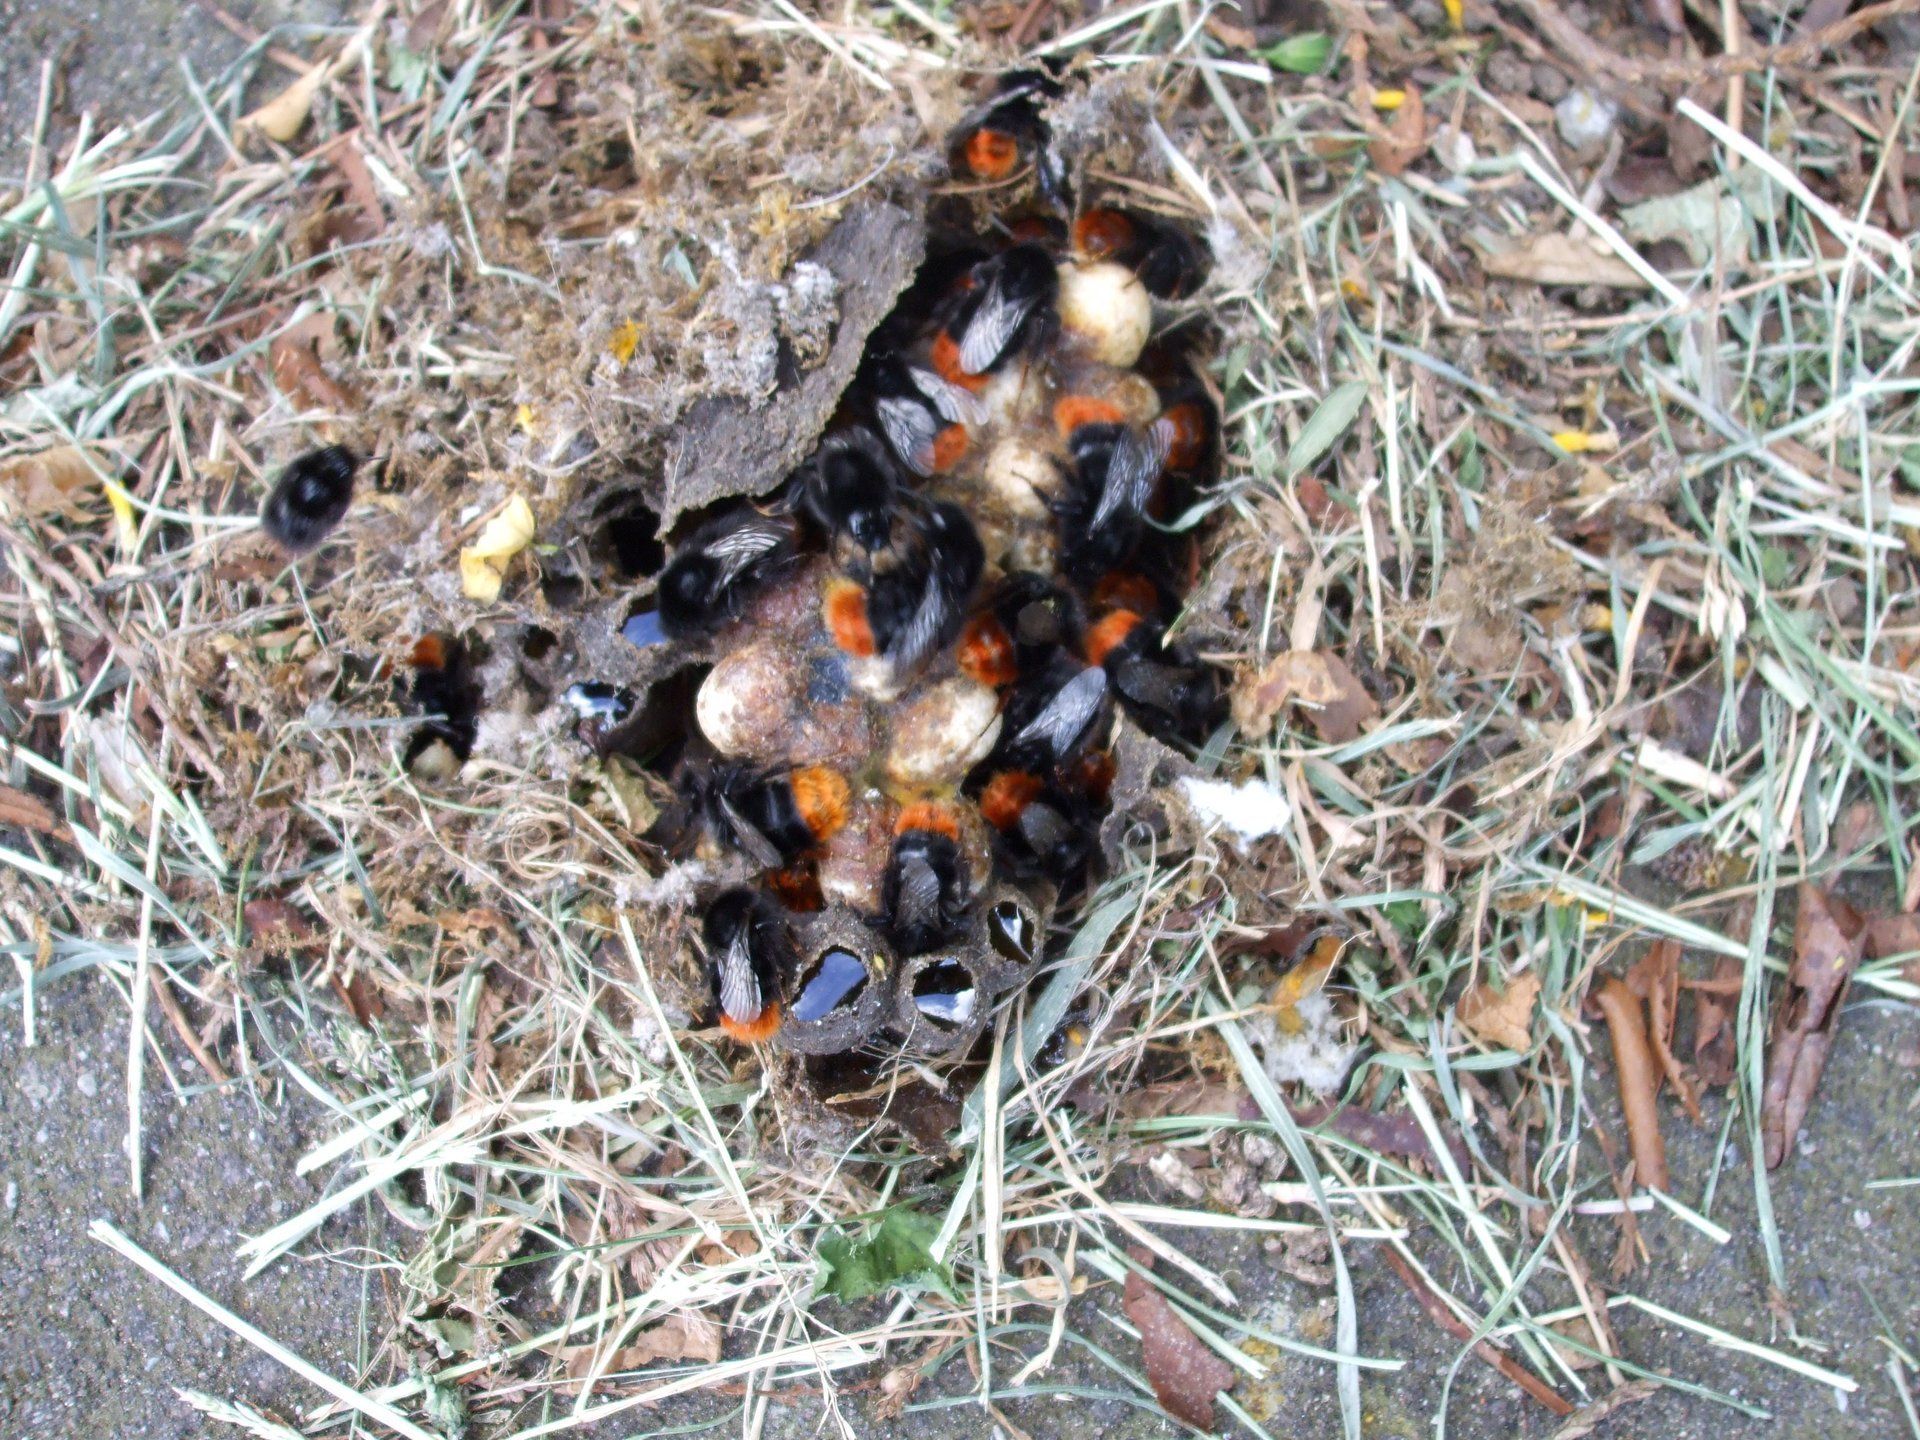 Bumble Bee Control Bumble Bee Nests Portland Or